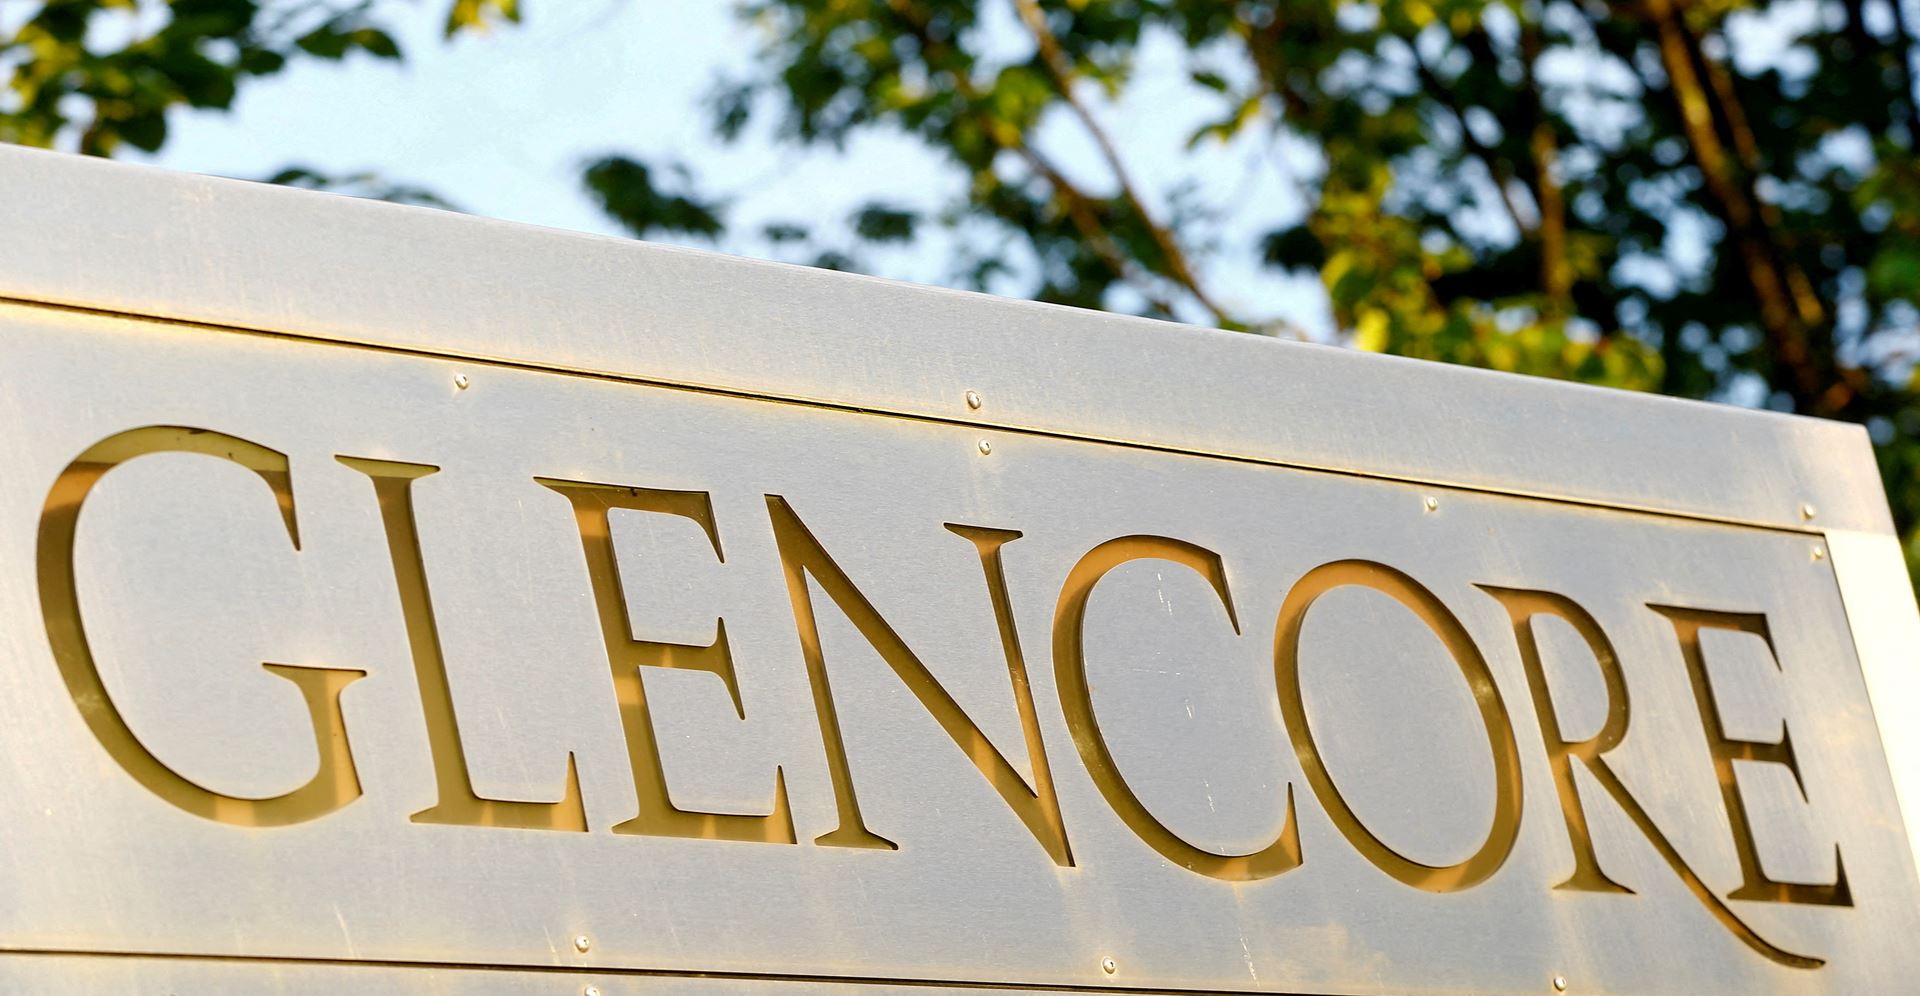 Glencore's net profit decreased in the first half of the year